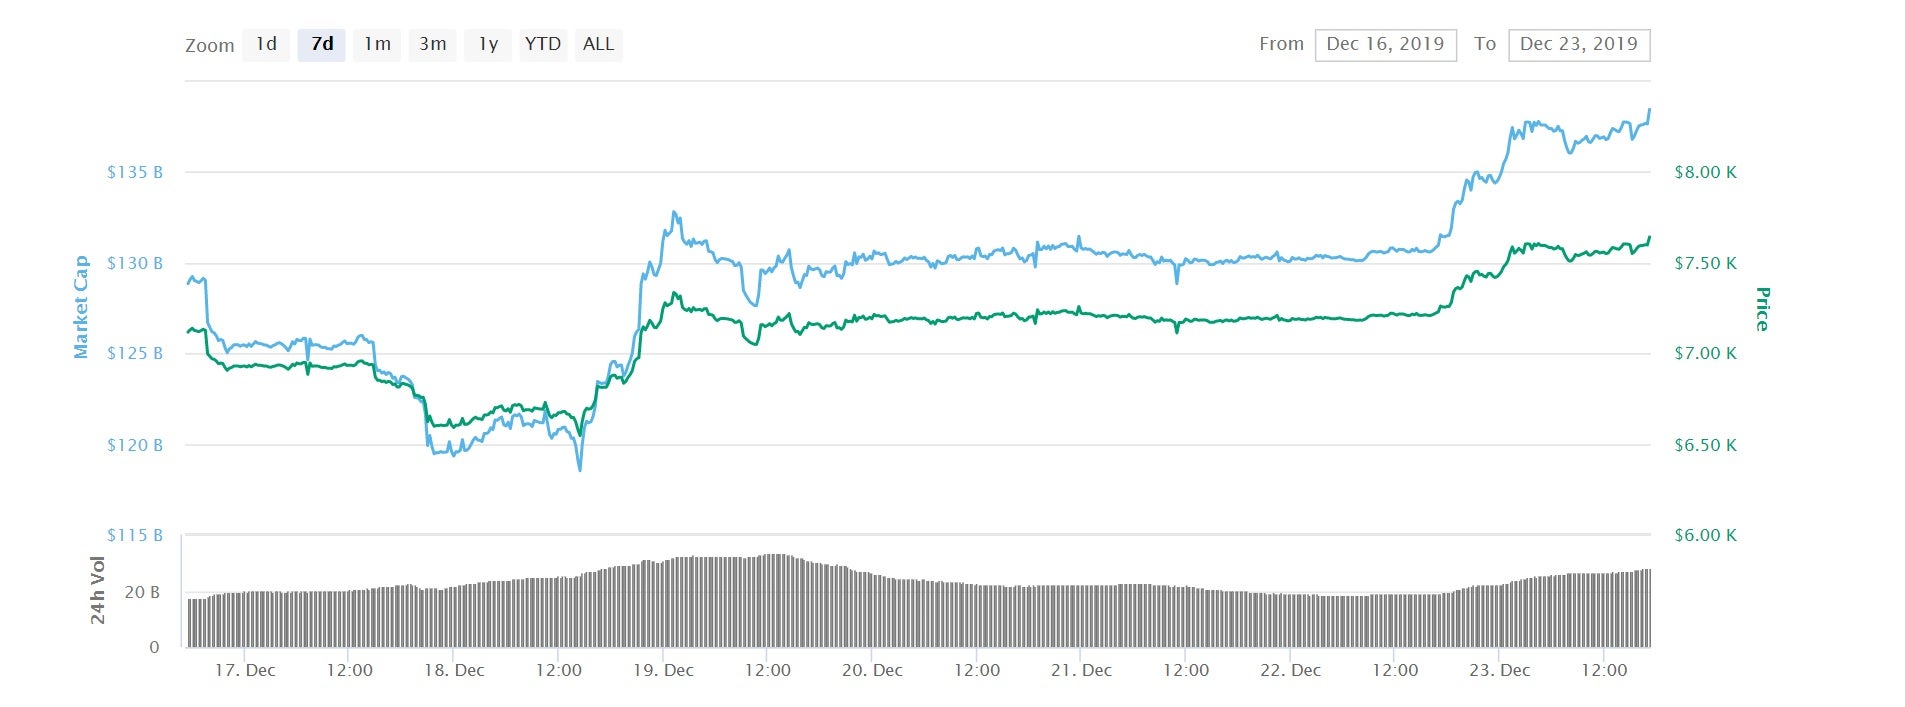 Bitcoin has seen two significant price surges over the last week